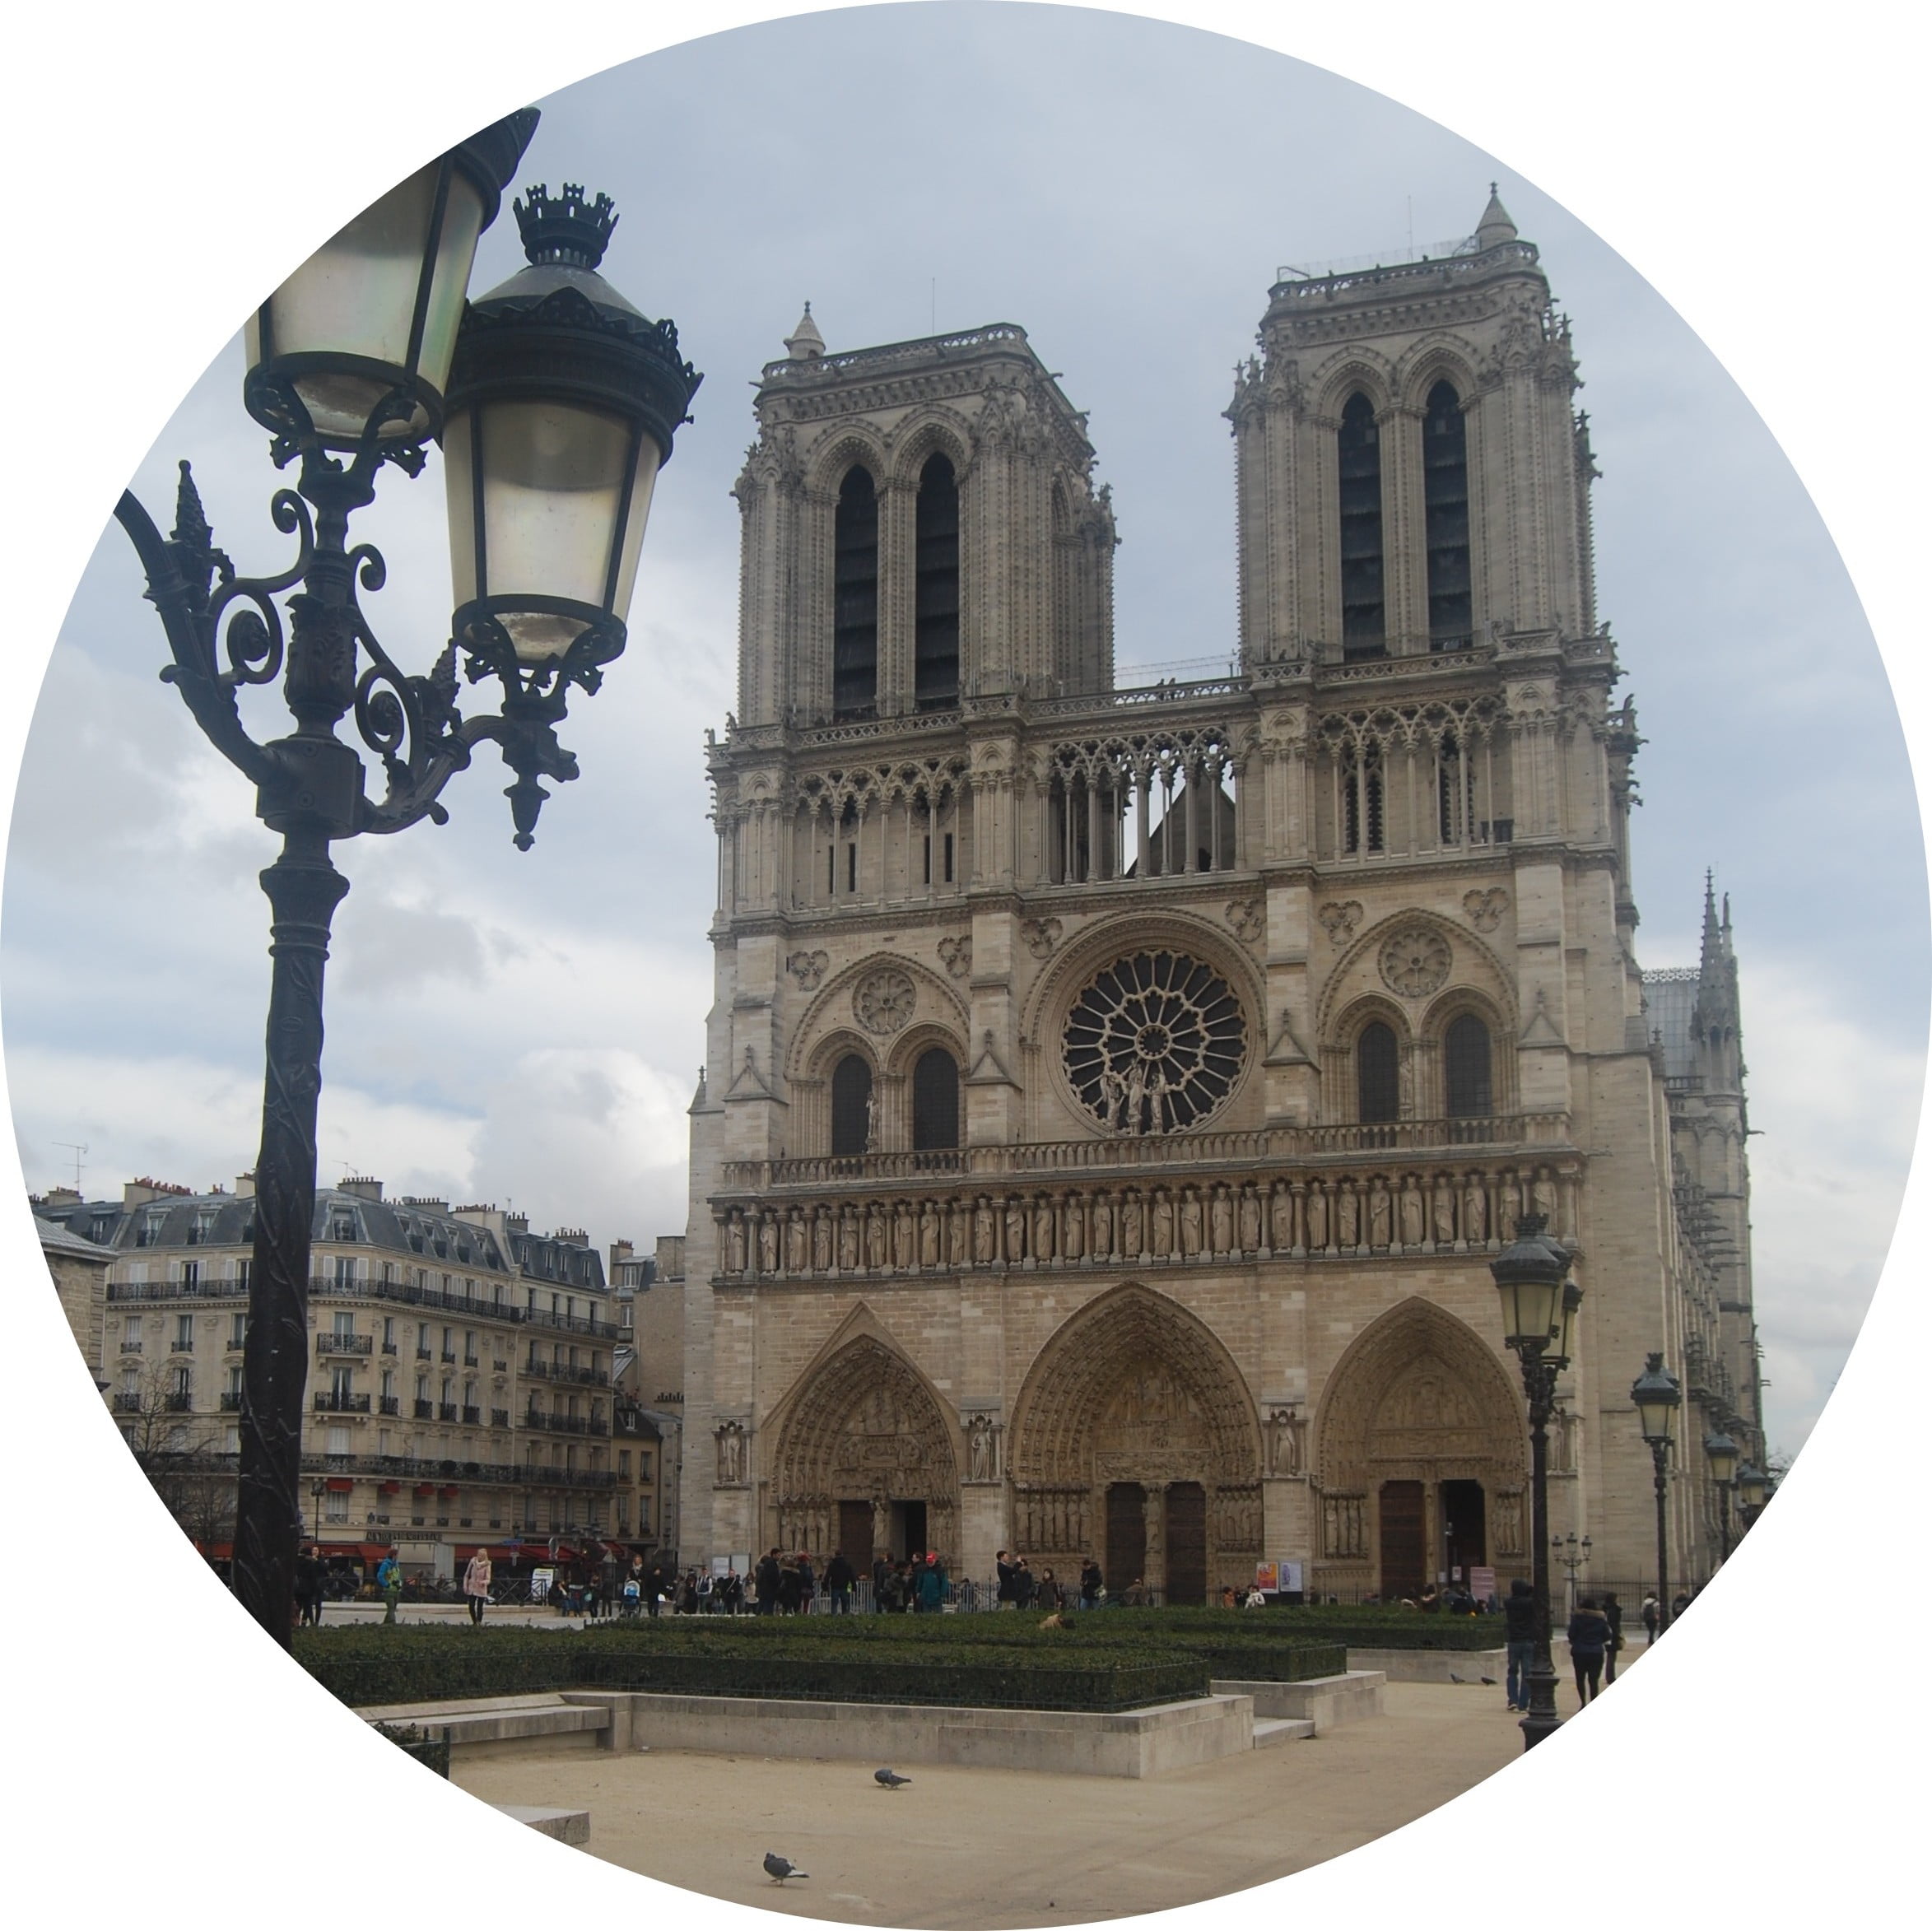 April in Paris - Notre Dame - www.MyFrenchLife.org